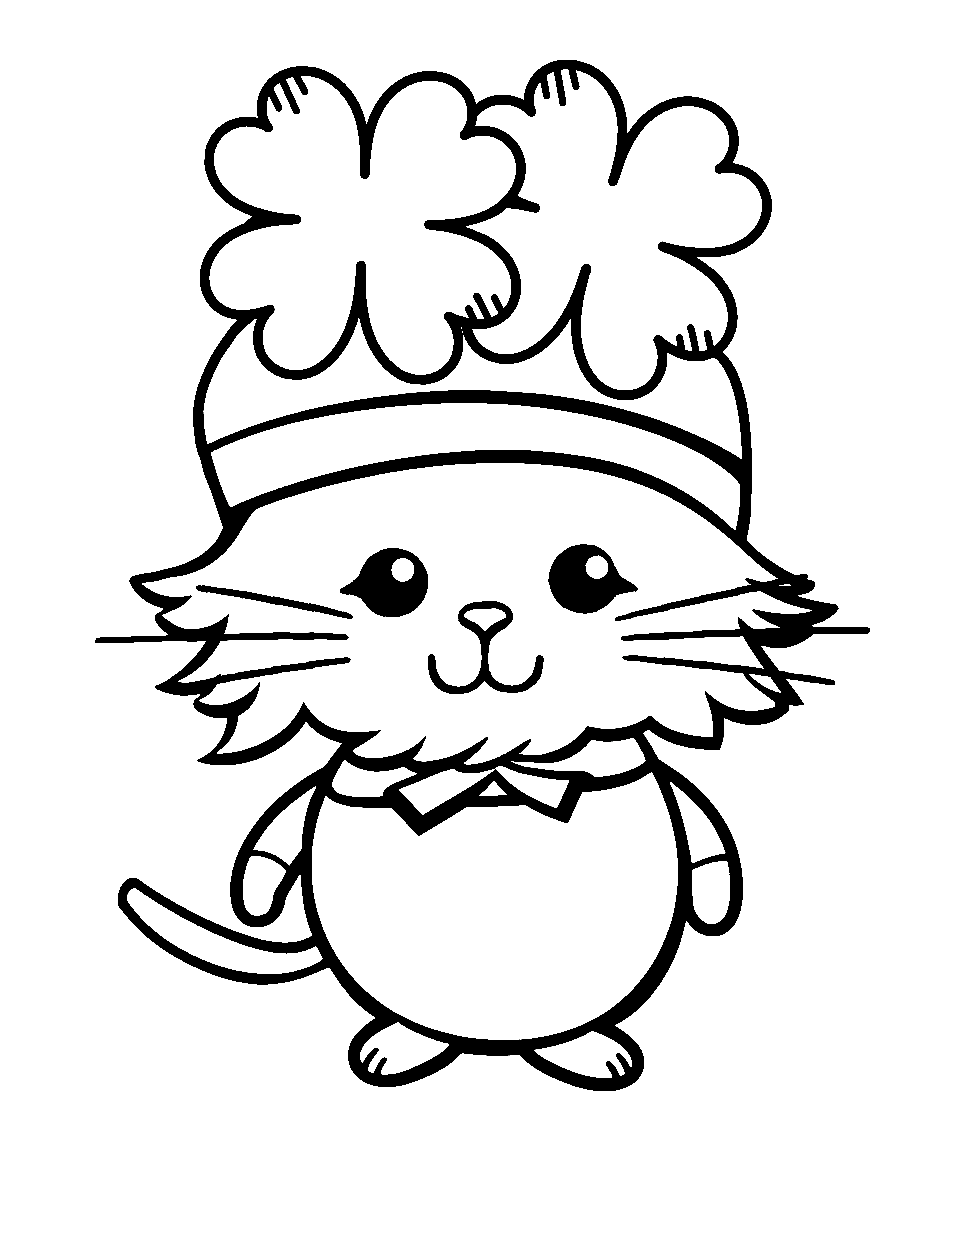 Kitten with a Clover Hat Coloring Page - A cute kitten wearing a clover hat.